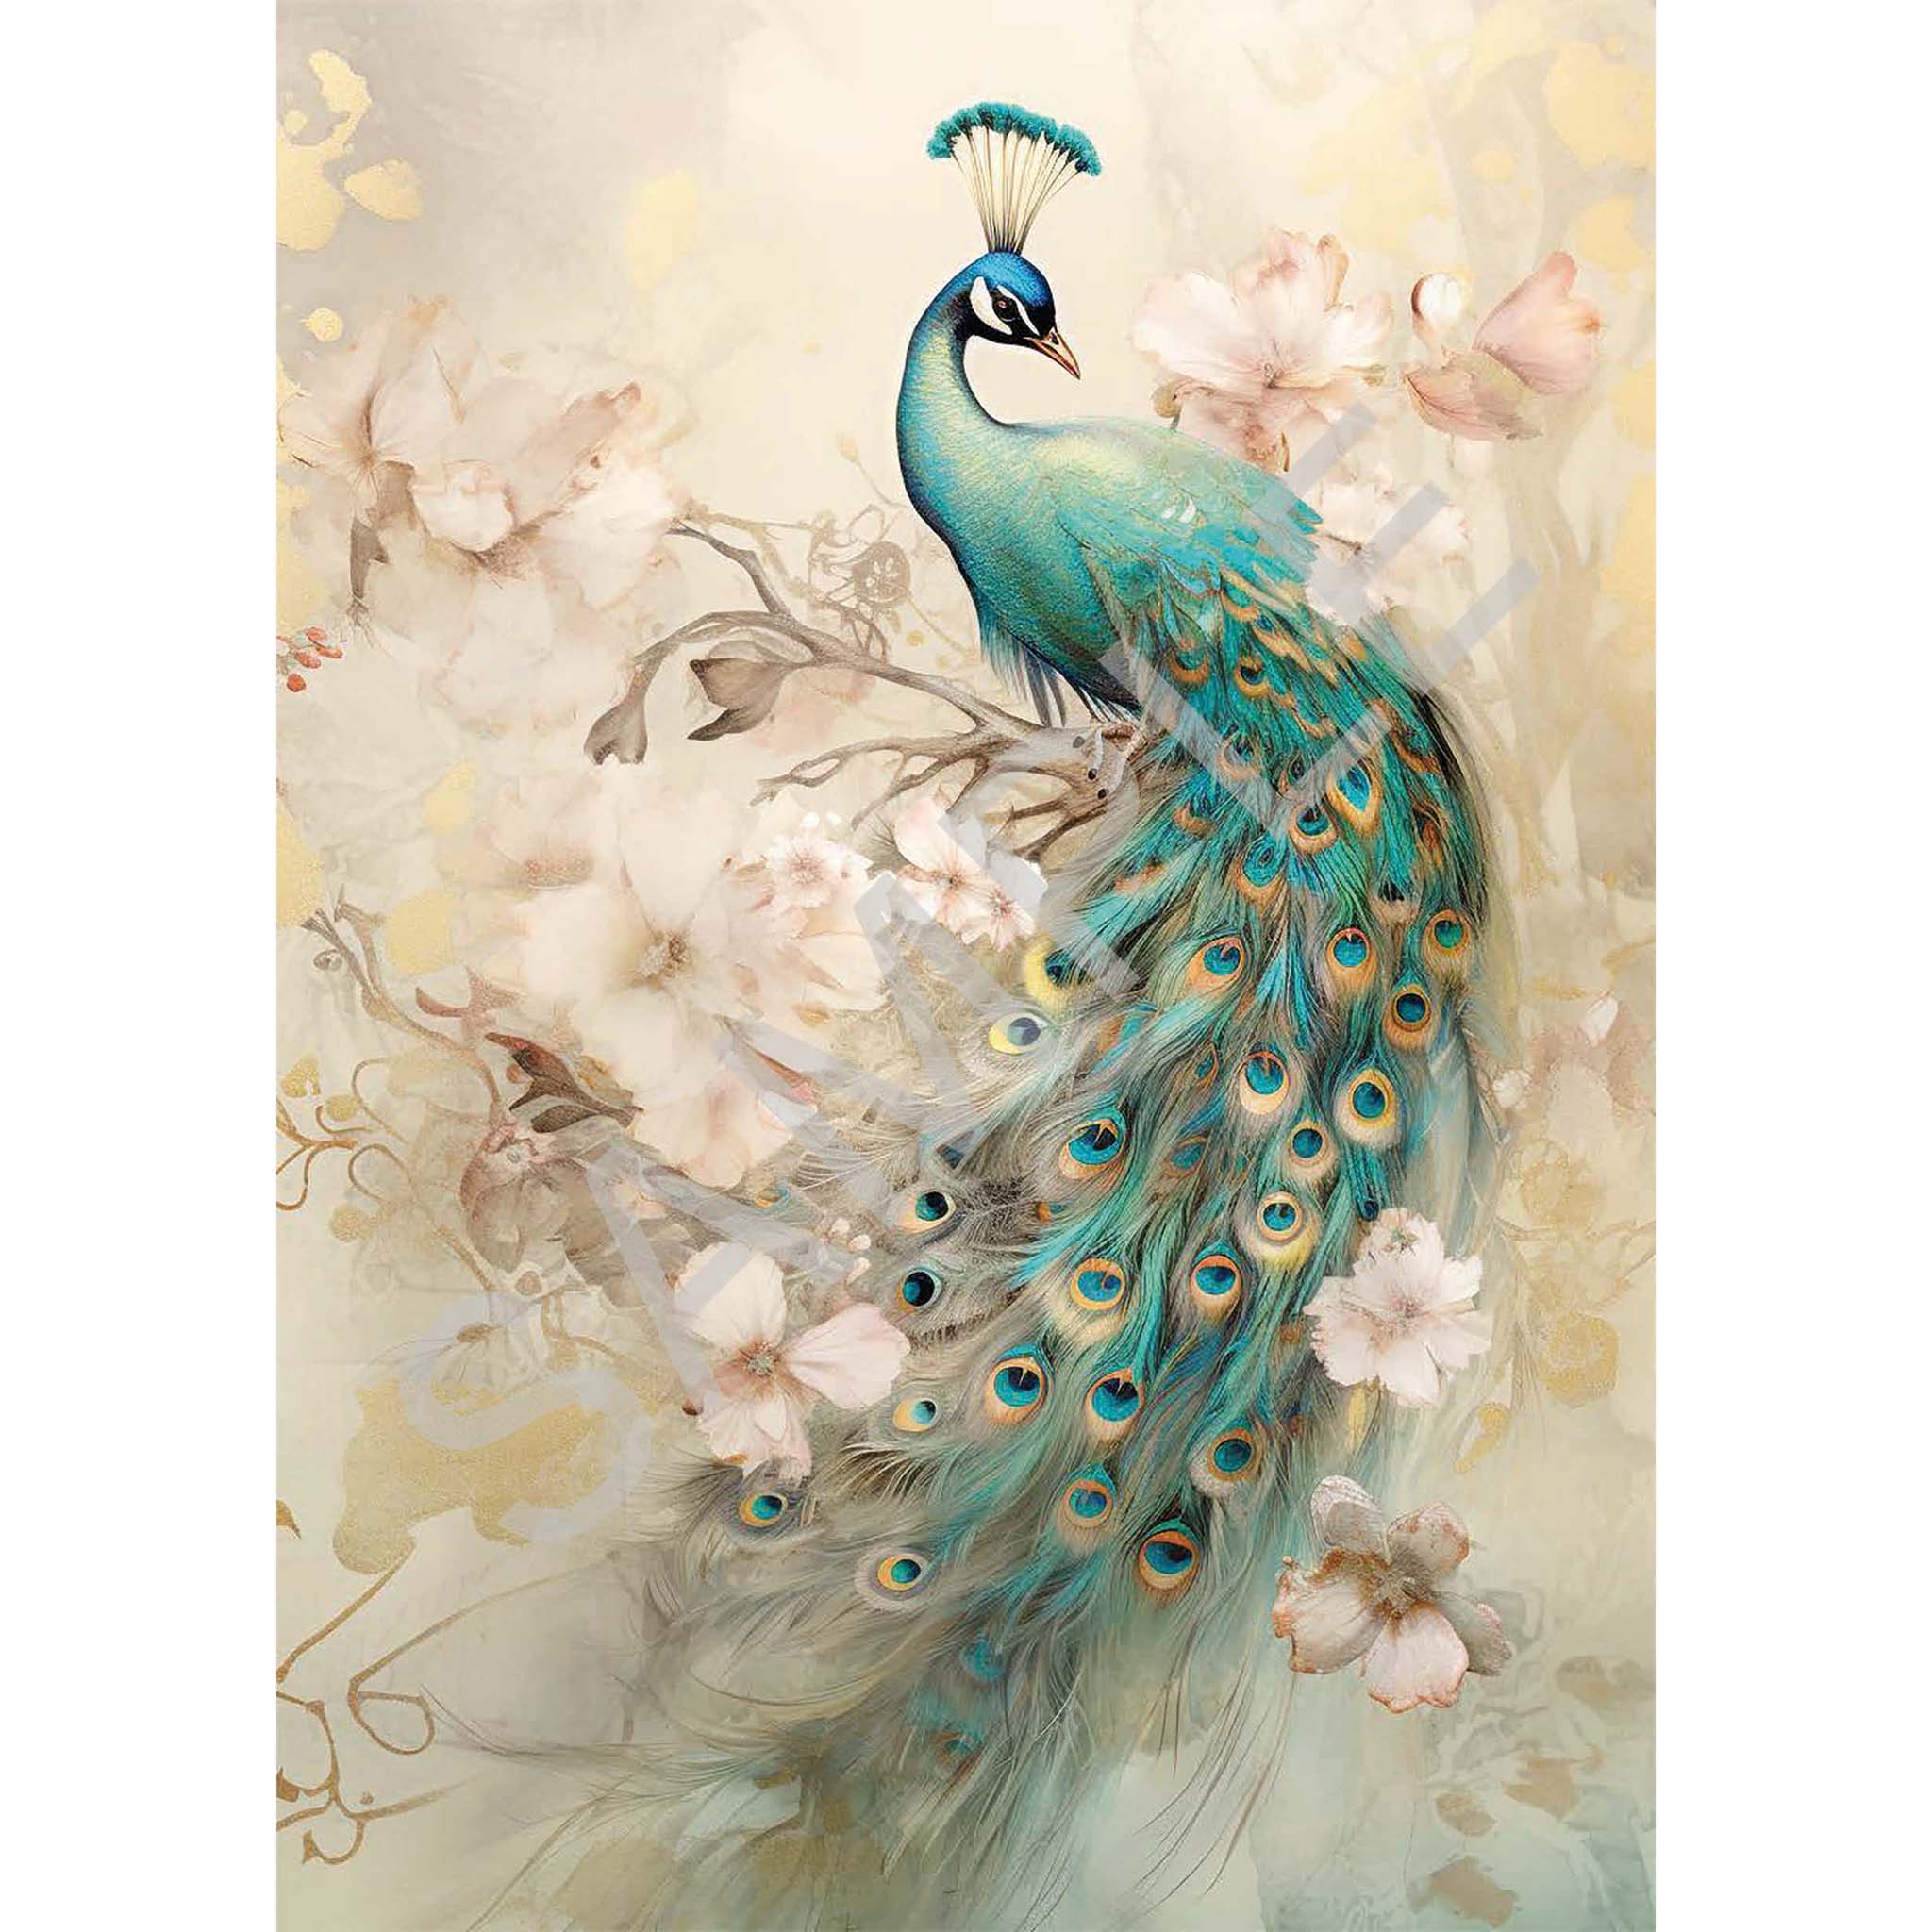 A4 rice paper design featuring a vibrant peacock amid a pastel background and blooming flowers. White borders are on the sides.